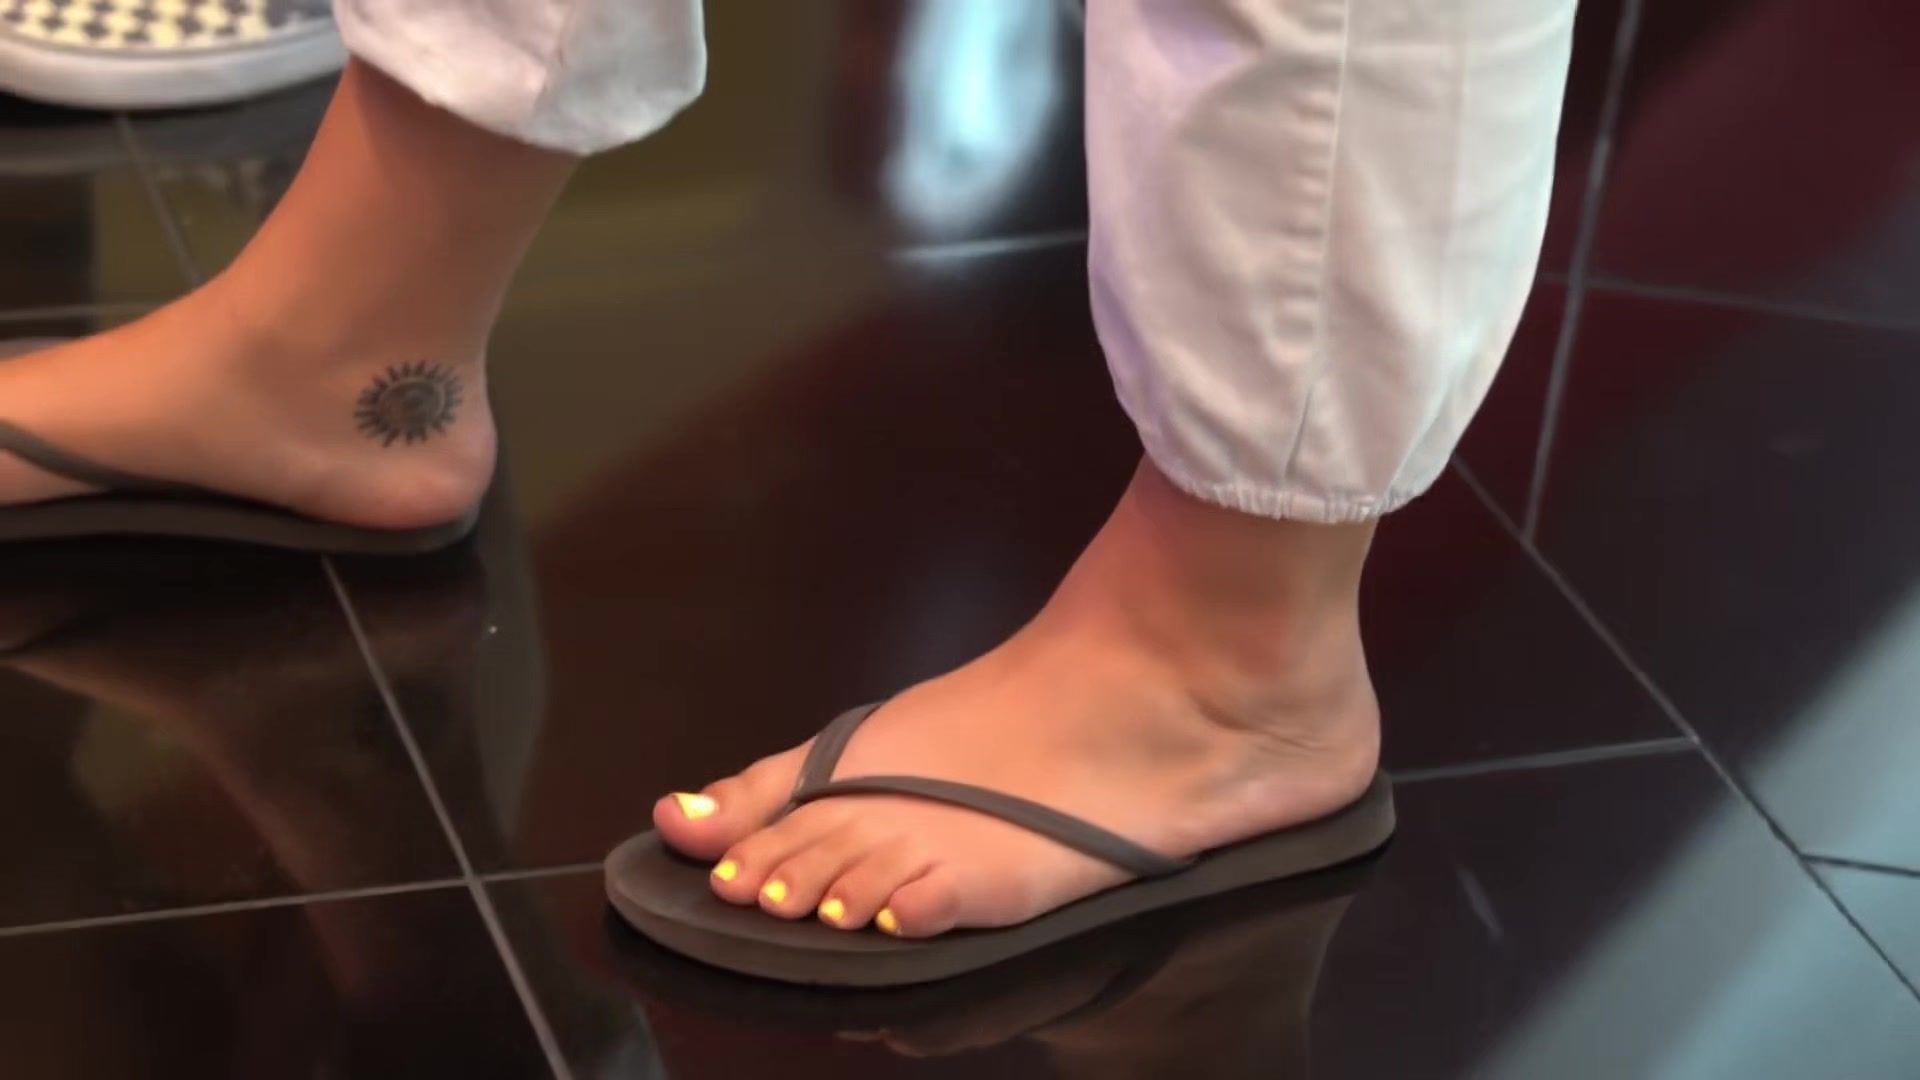 Gay Voyeur Camera Captures Sexy Teenage Babes Feet With Yellow Nail Polish At The Shopping Mall Point Of View